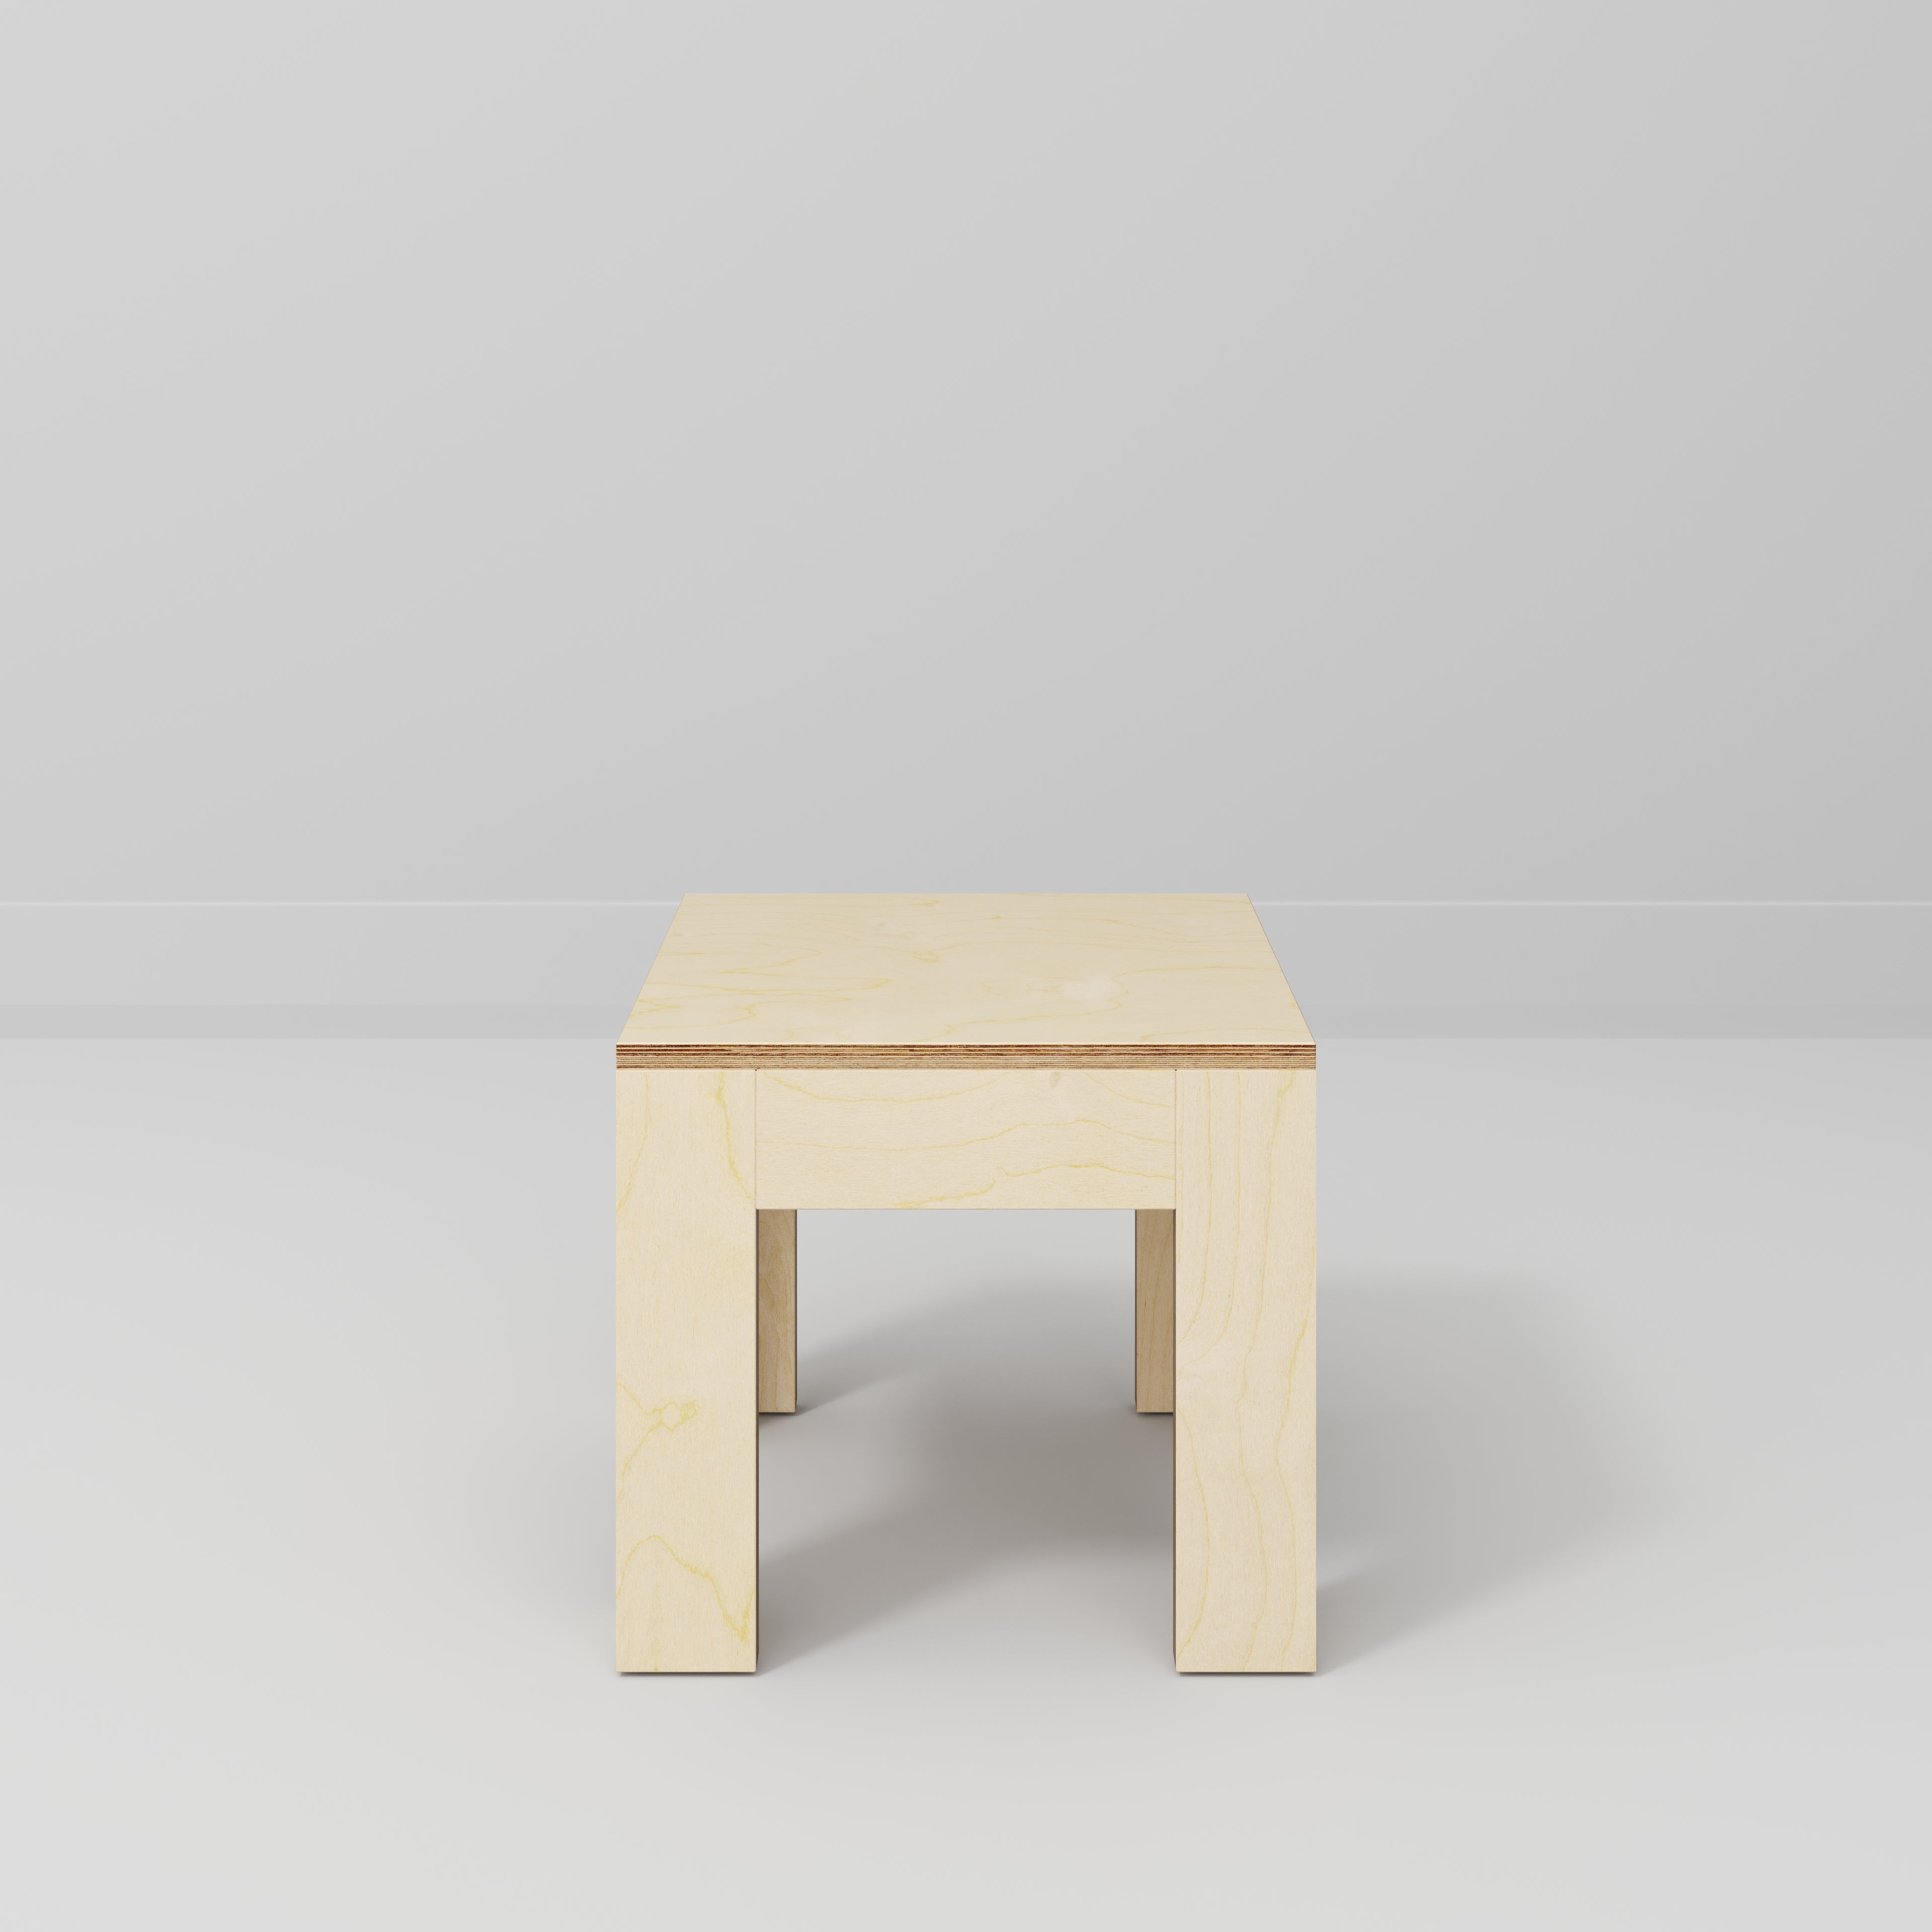 Custom Plywood Side Table with Solid Frame